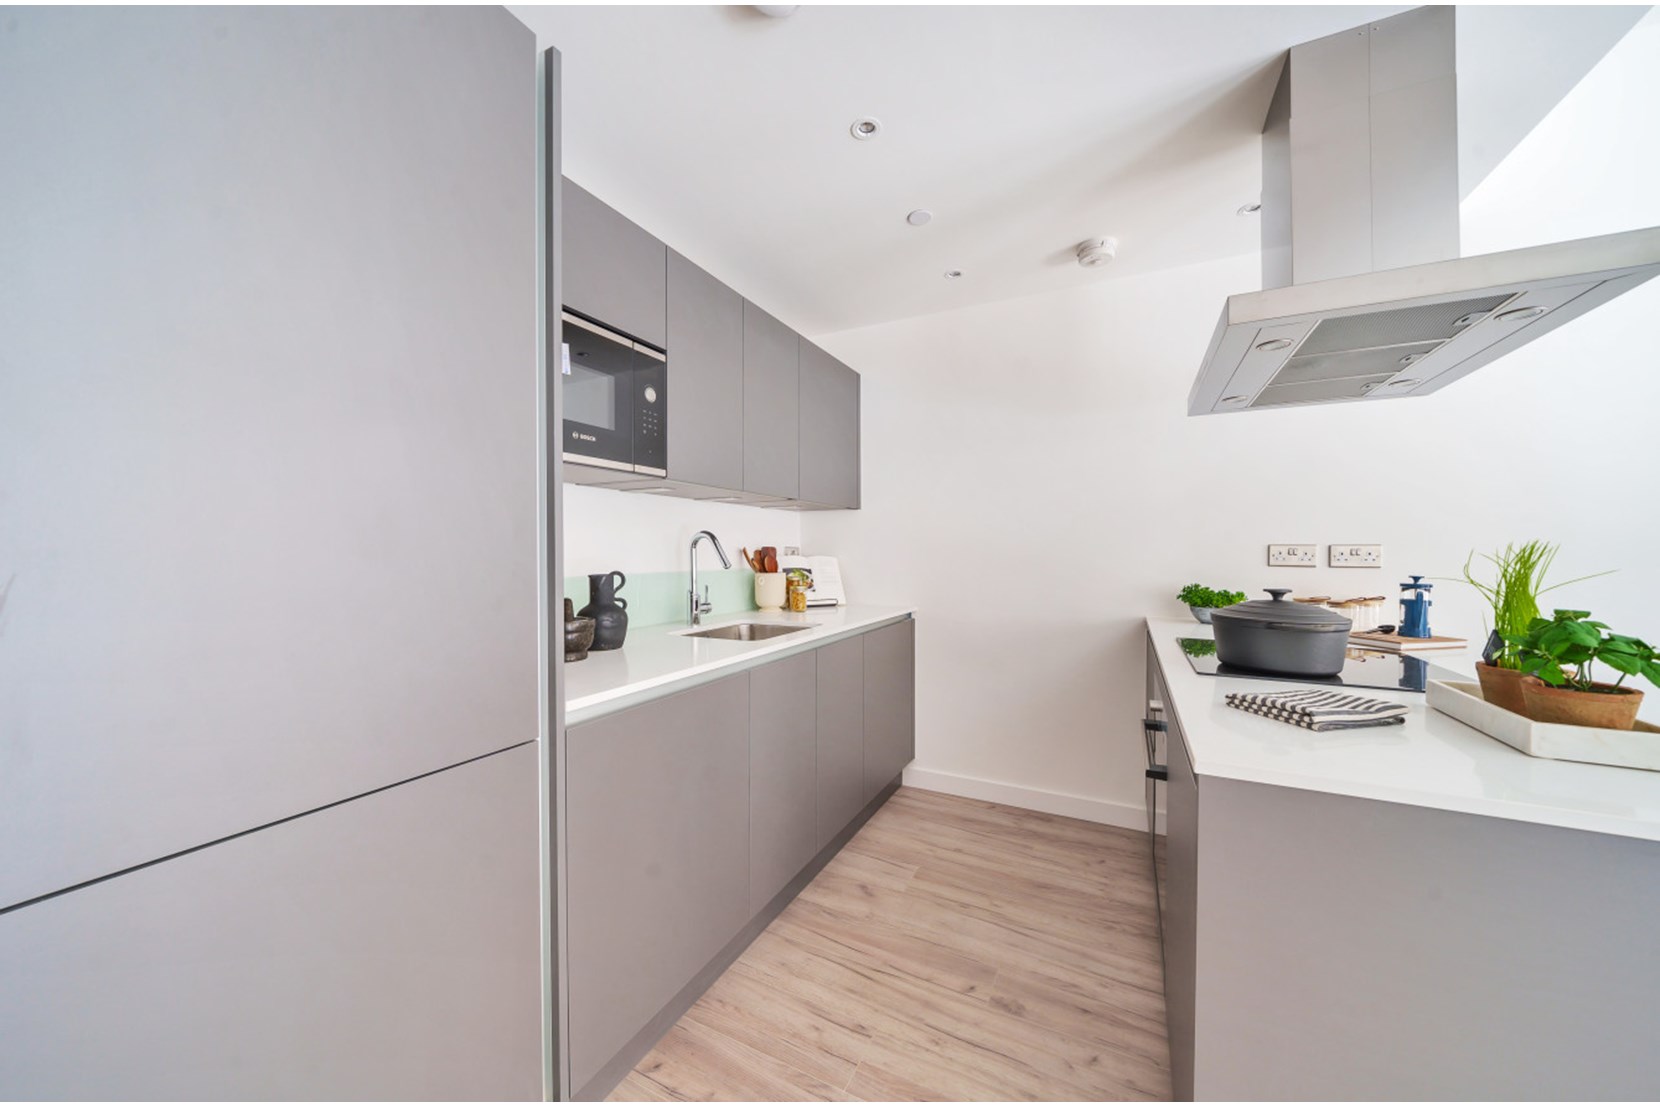 Apartments to Rent by Simple Life London in Anchor's Point, Royal Albert Dock, Newham, E16, kitchen